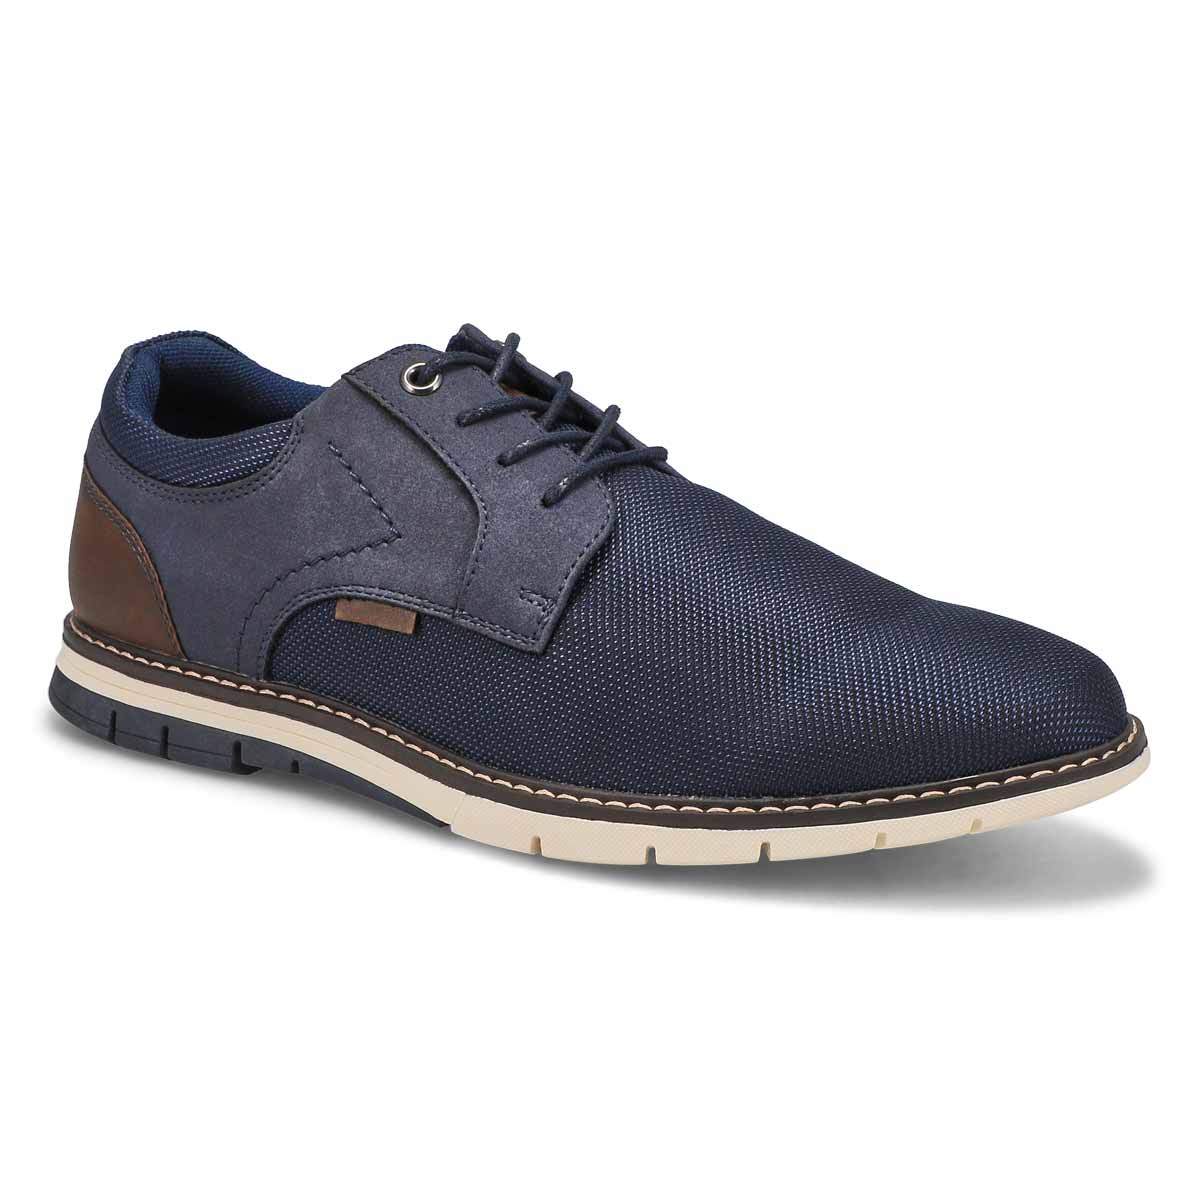 Men's Royce Lace Up Casual Oxford - Navy